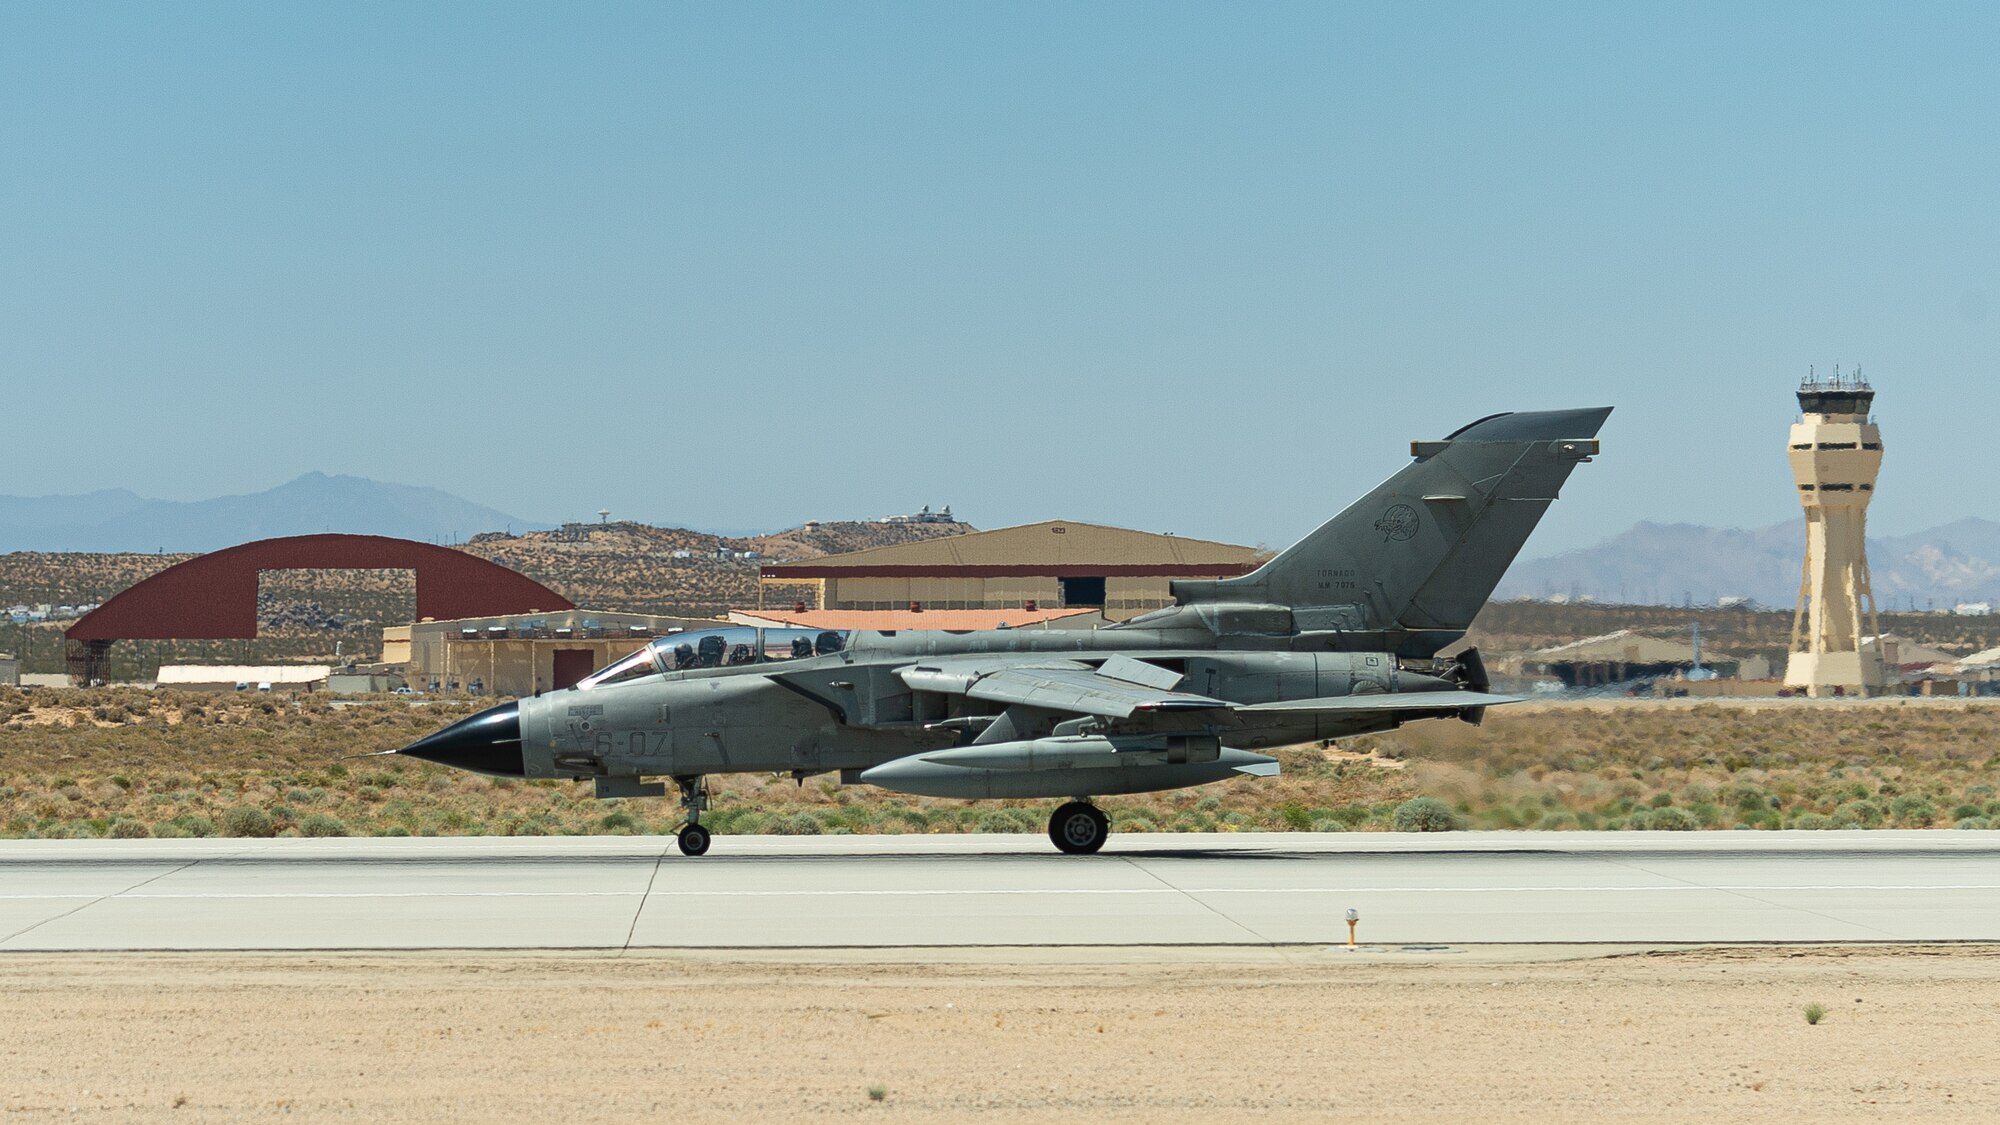 An Italian Air Force PA-200 Tornado lands at Edwards Air Force Base, May 9. Members of the Italian Air Force partnered with their Edwards AFB counterparts to conduct test sorties to gather data on weapon pairing. (Air Force photo by Josh McClanahan)